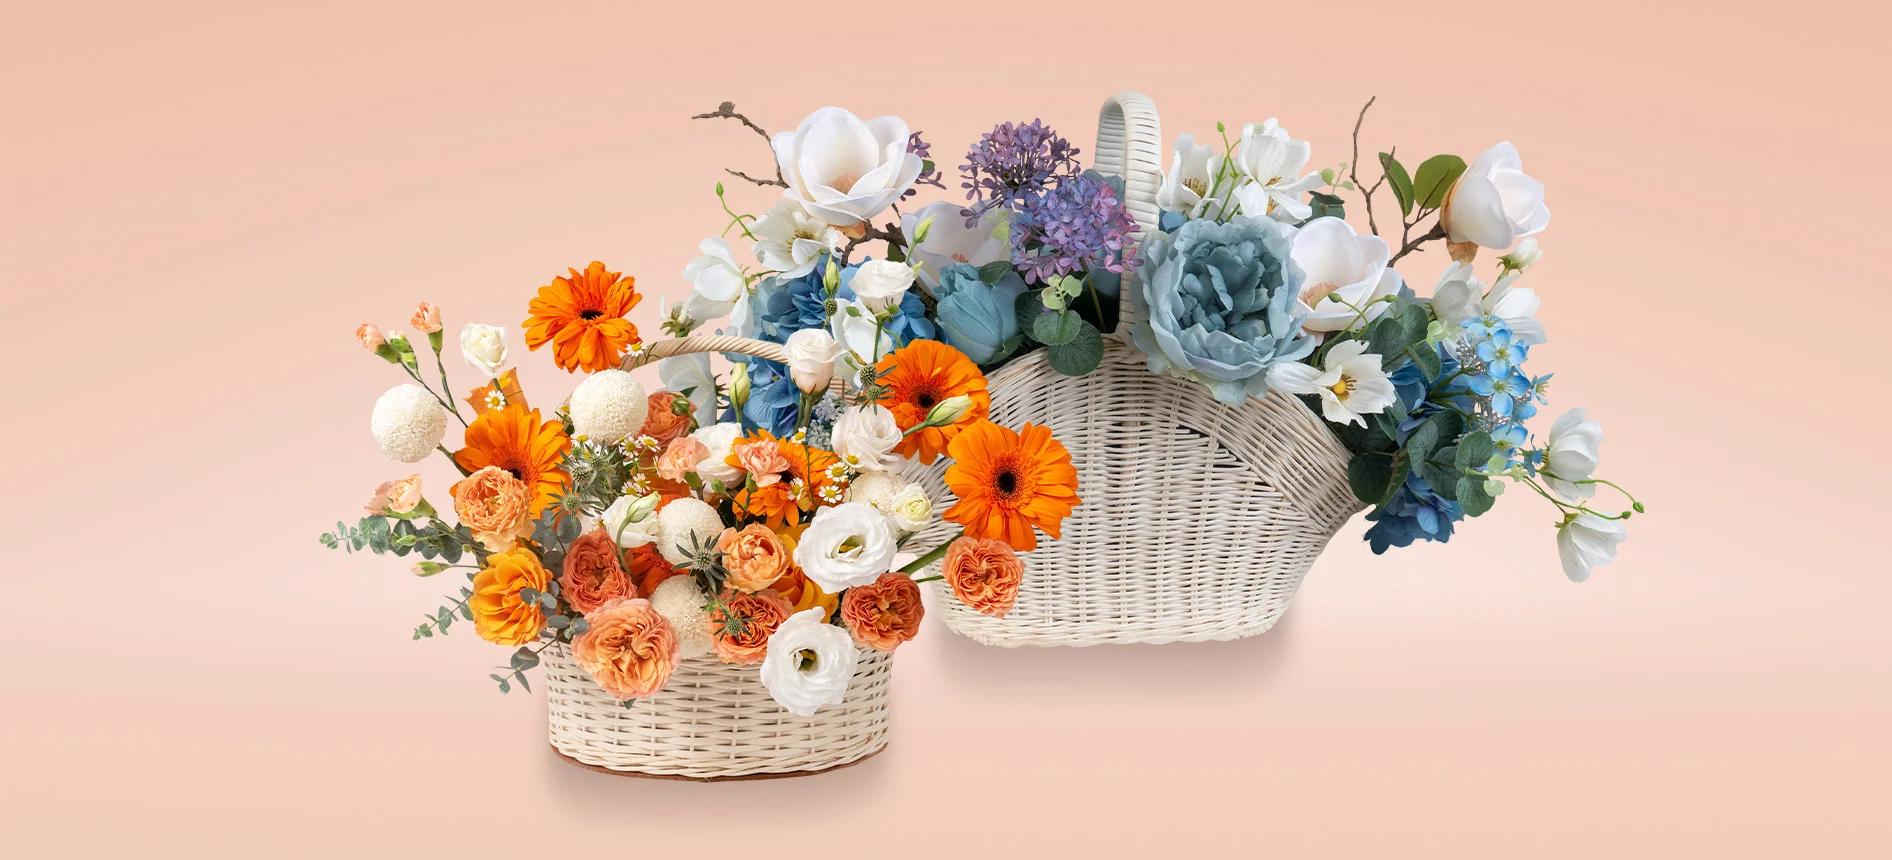 Fresh Flower basket and Artificial Flower baskets Give best wishes to each other from Love You Flower.